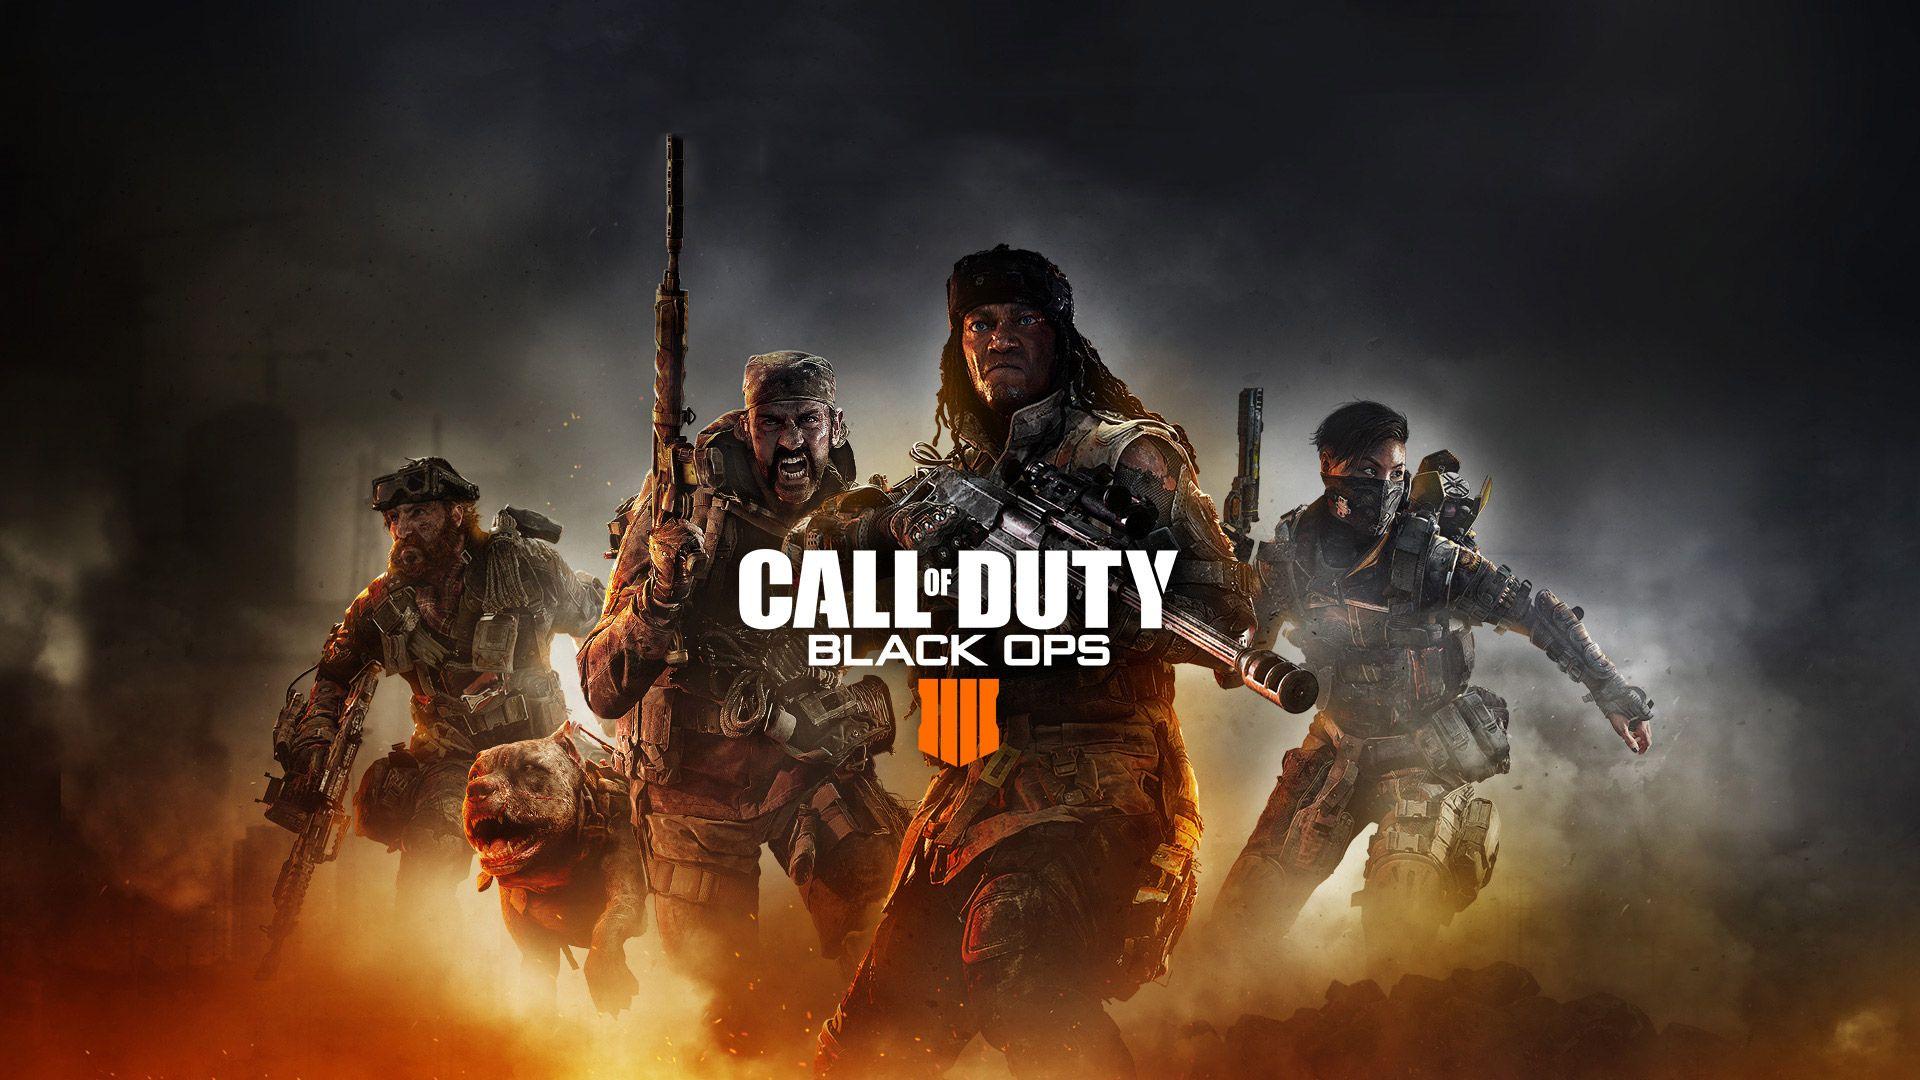 Call of Duty Black Ops 4 Wallpapers - Top Free Call of Duty Black Ops 4